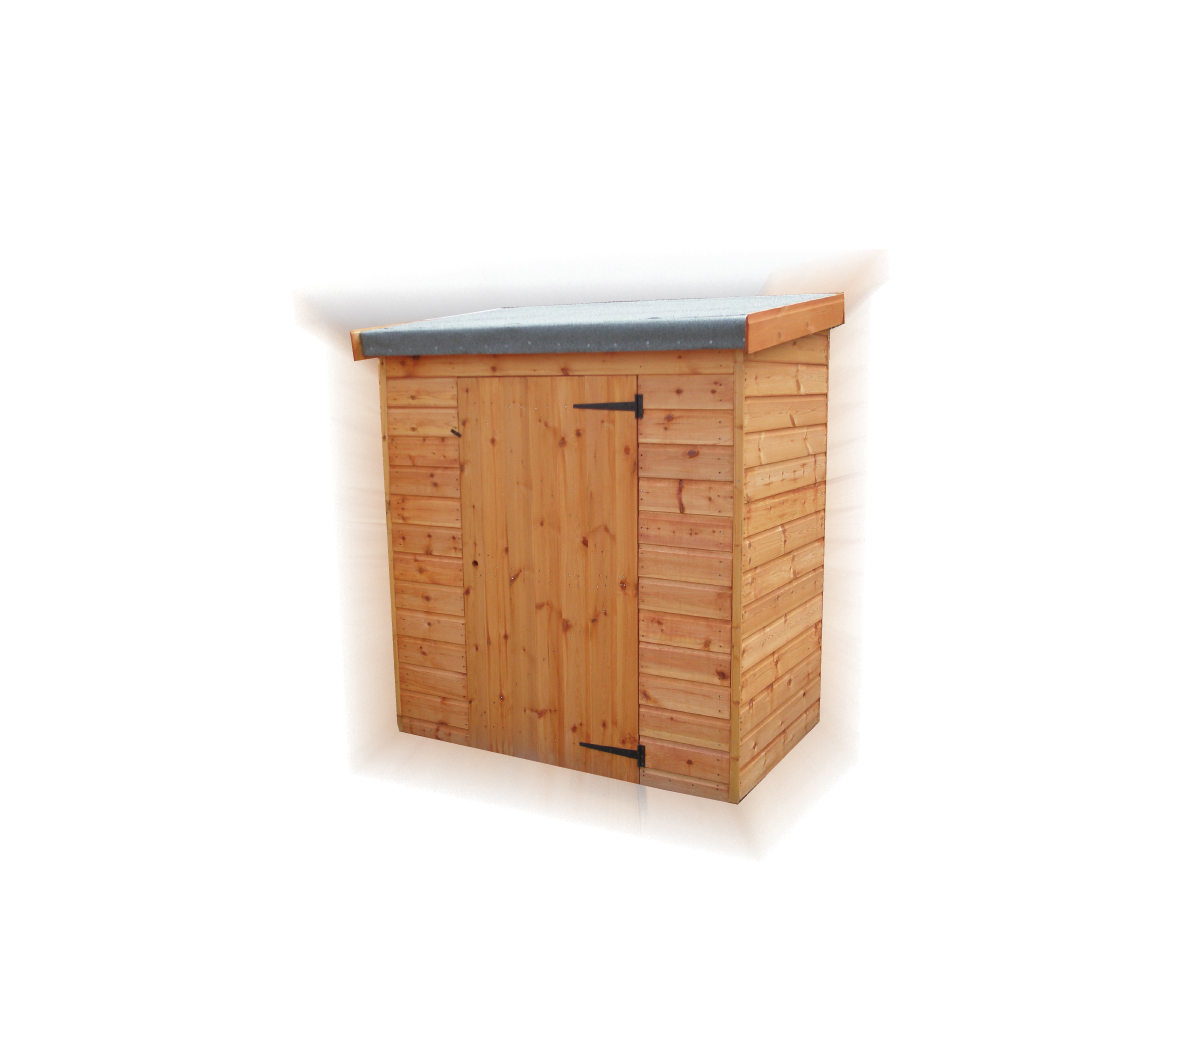 My storage shed: Topic Garden sheds rotherham